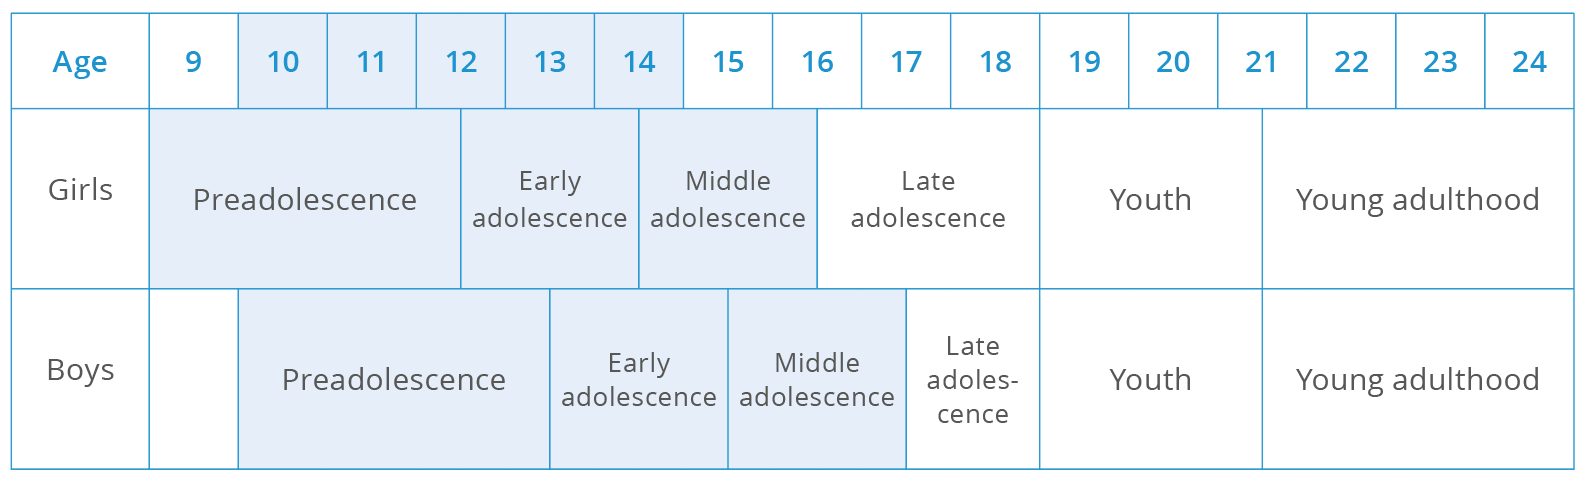 The stages of adolescence (PAHO classification)